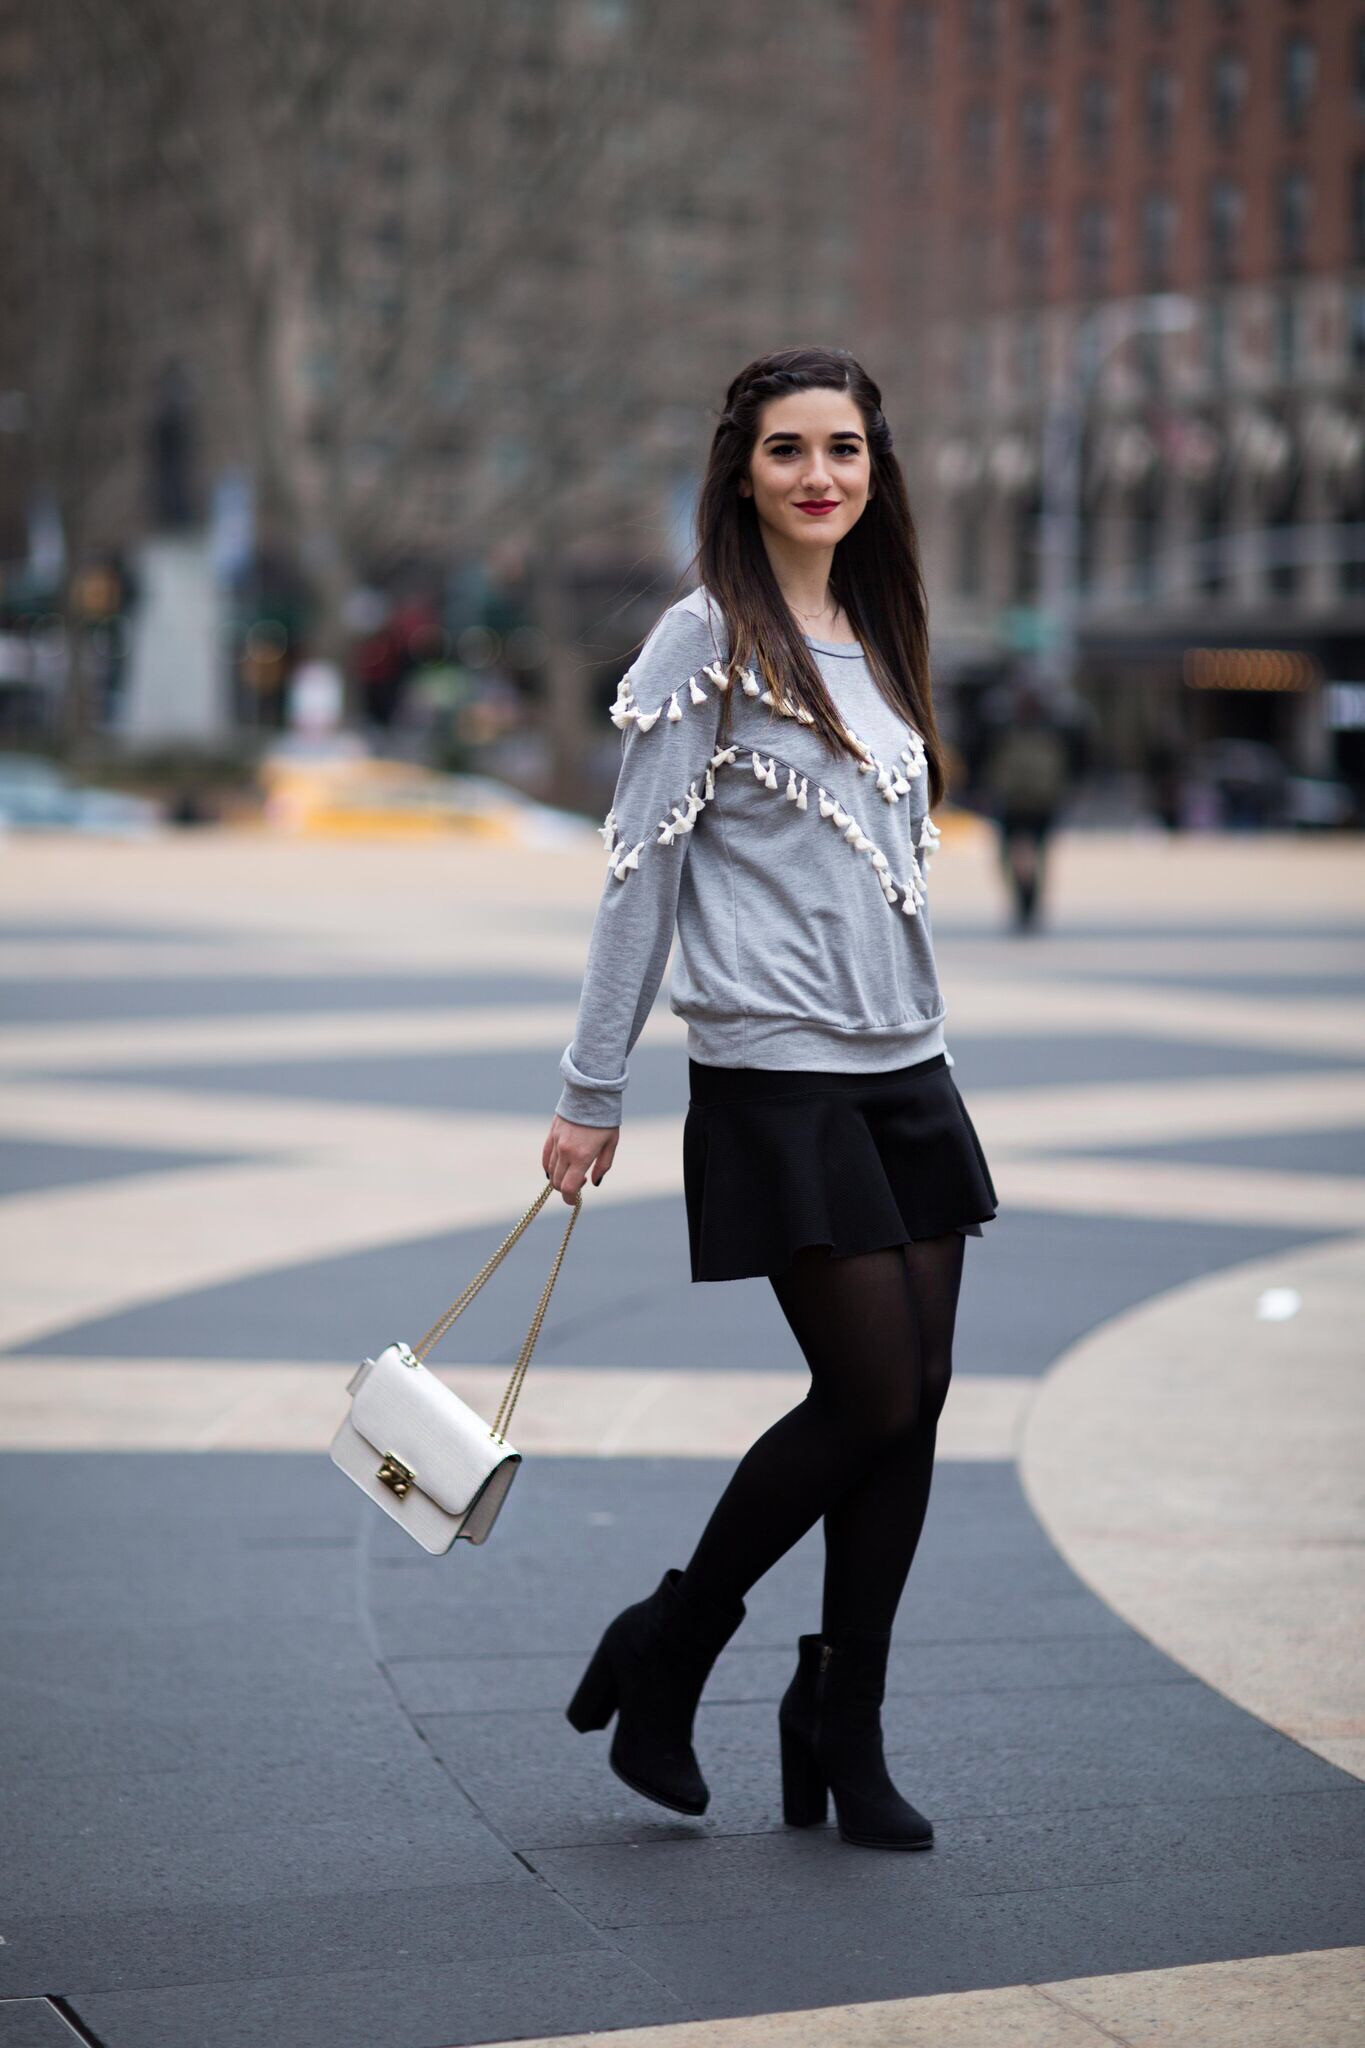 Grey Tassel Sweatshirt Everything You Wanted To Know About Blog Interns Esther Santer Fashion Blog NYC Street Style Blogger Outfit OOTD Trendy Henri Bendel Waldorf Party Bag Black Mini Skirt Booties Shoes  Cozy Tights Photoshoot Model Girl Women Hair.jpg